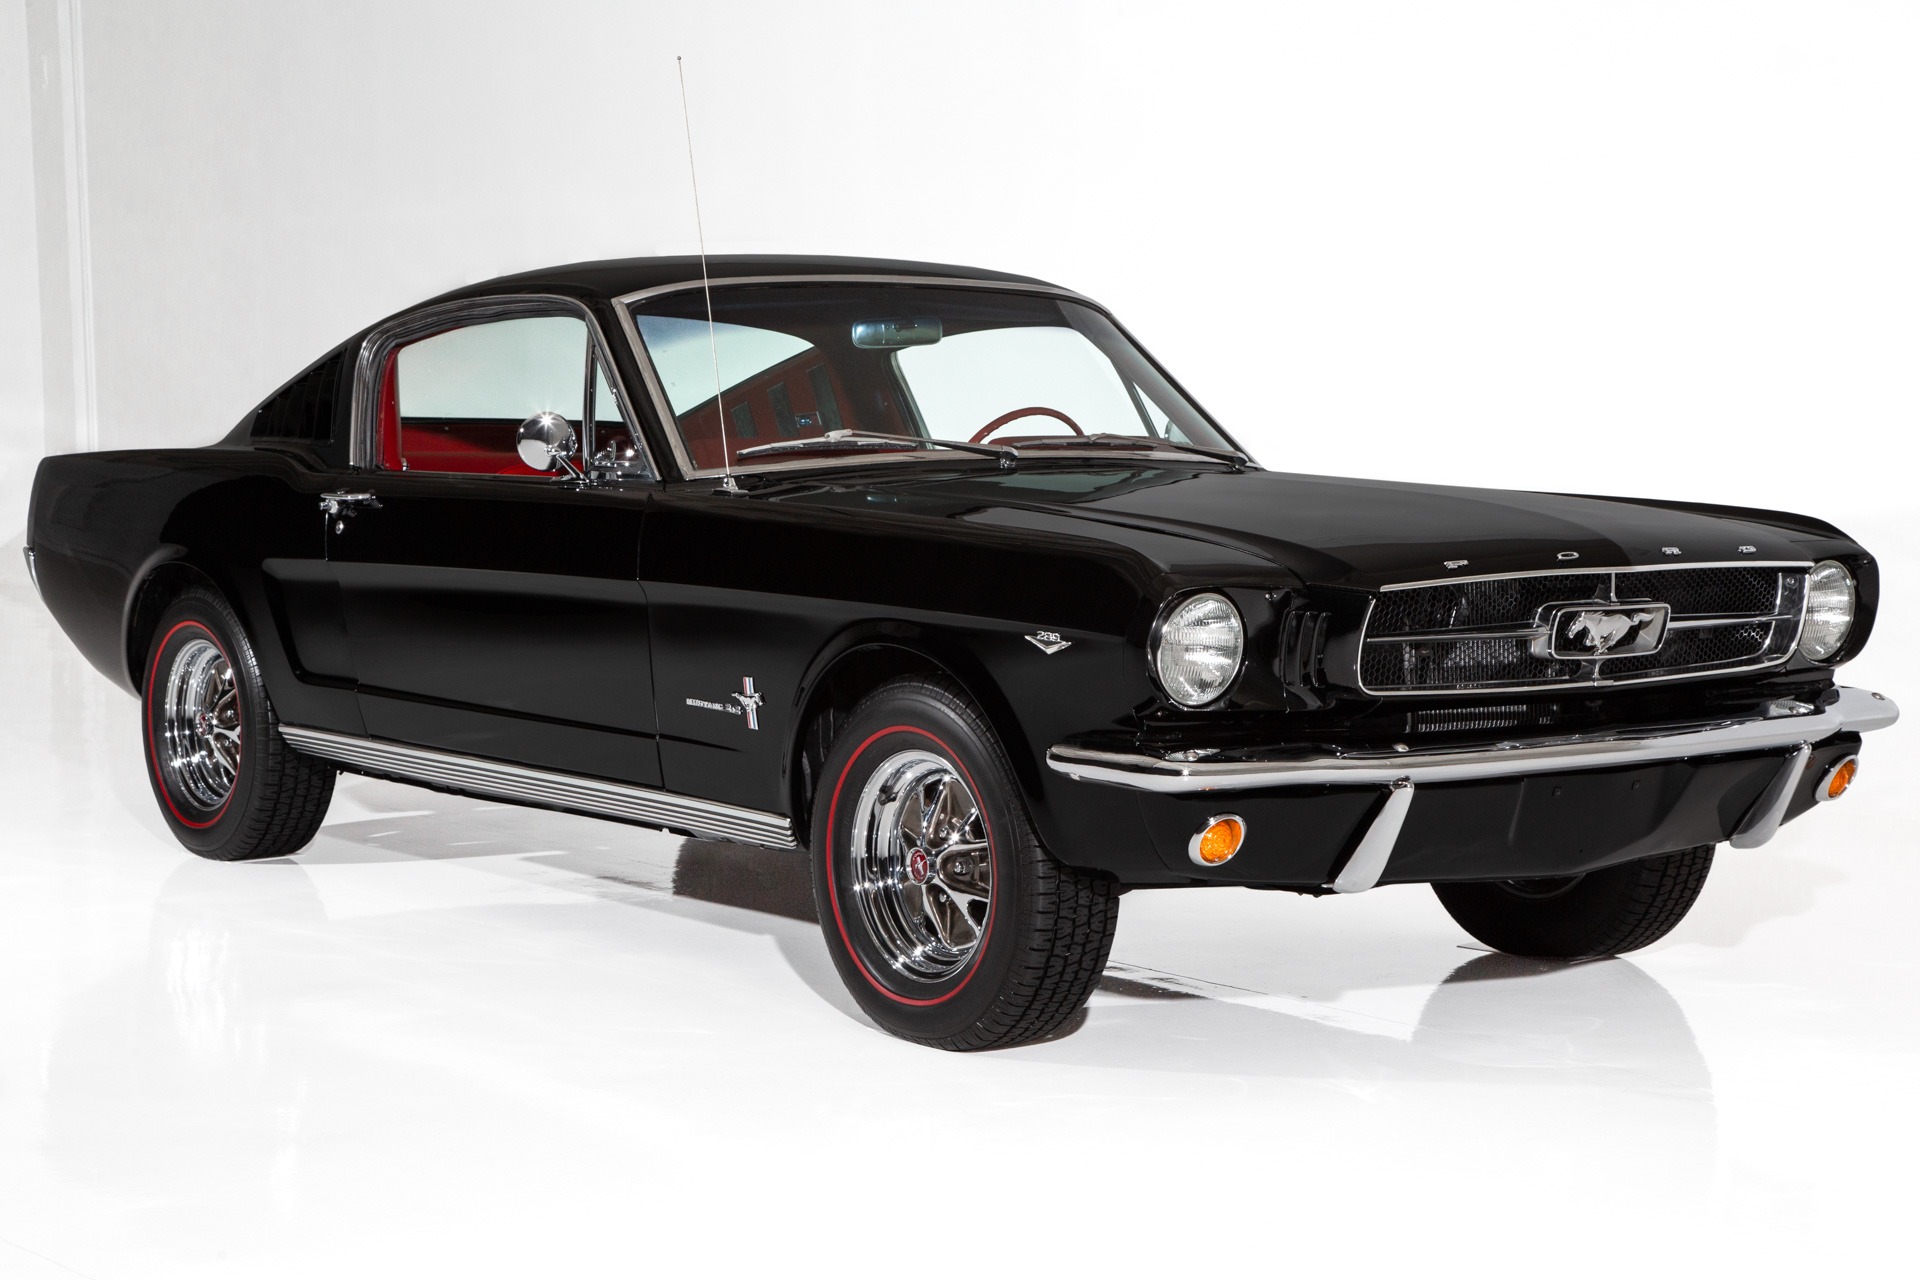 For Sale Used 1965 Ford Mustang Black/Red 289 4-Speed Redlines | American Dream Machines Des Moines IA 50309